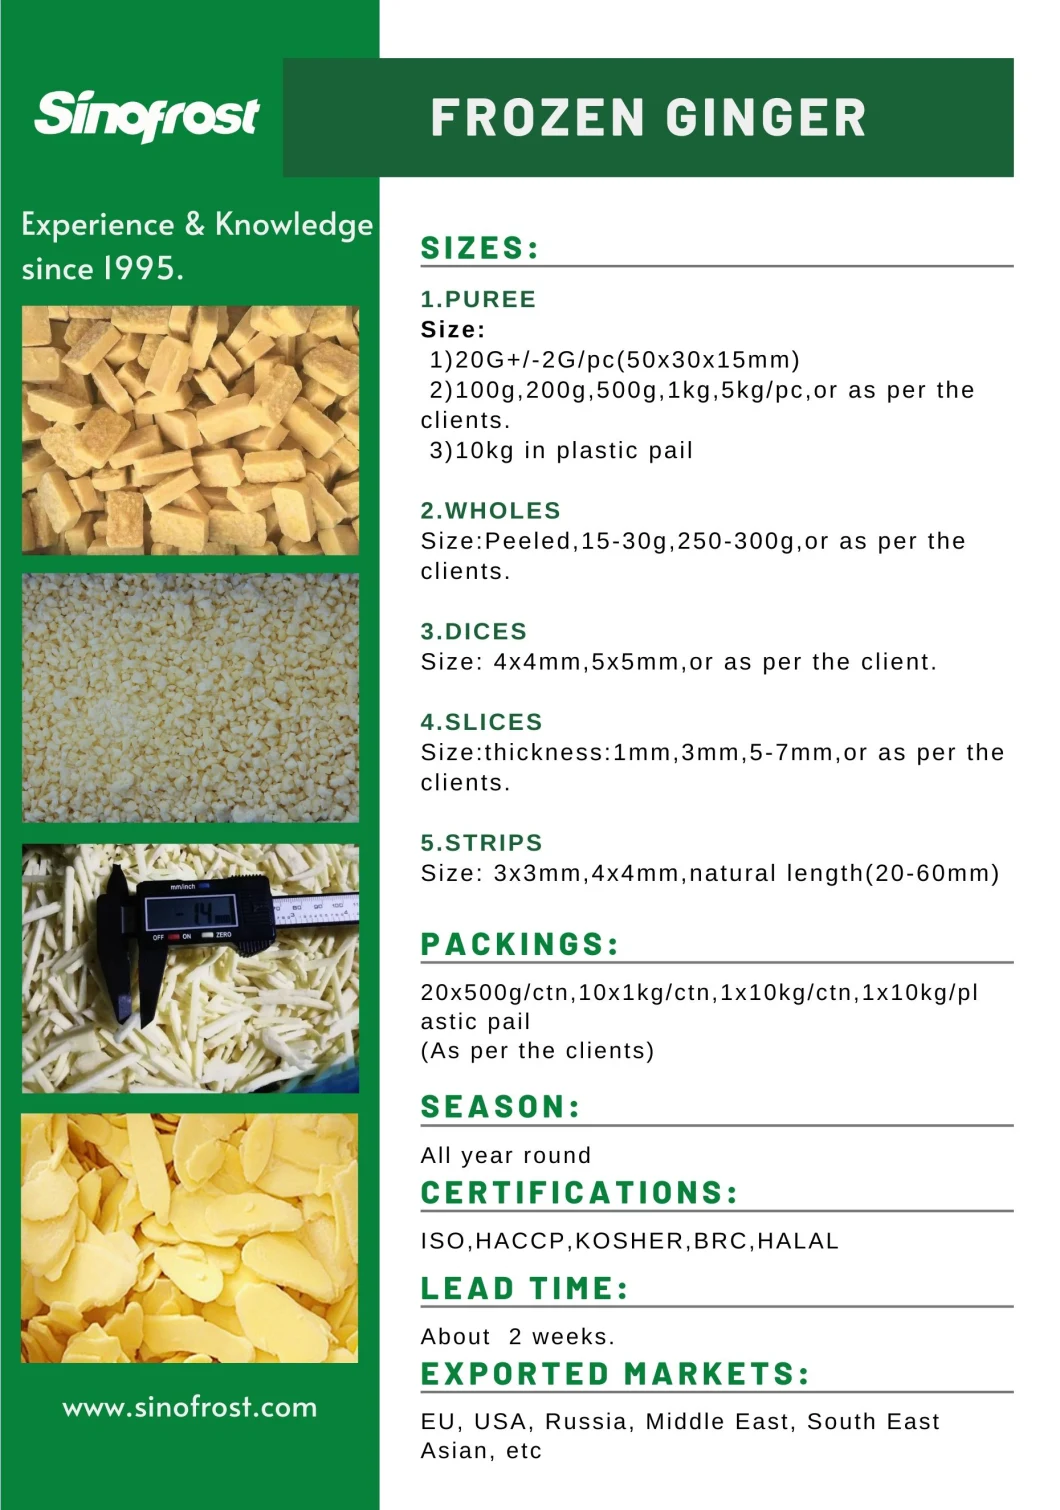 IQF Diced Ginger, Frozen Ginger Dices, IQF Diced Garlic, Frozen Garlic Dices, IQF Diced Celery, Frozen Celery Dices, IQF Spring Onion Cuts, IQF Onion Dices,